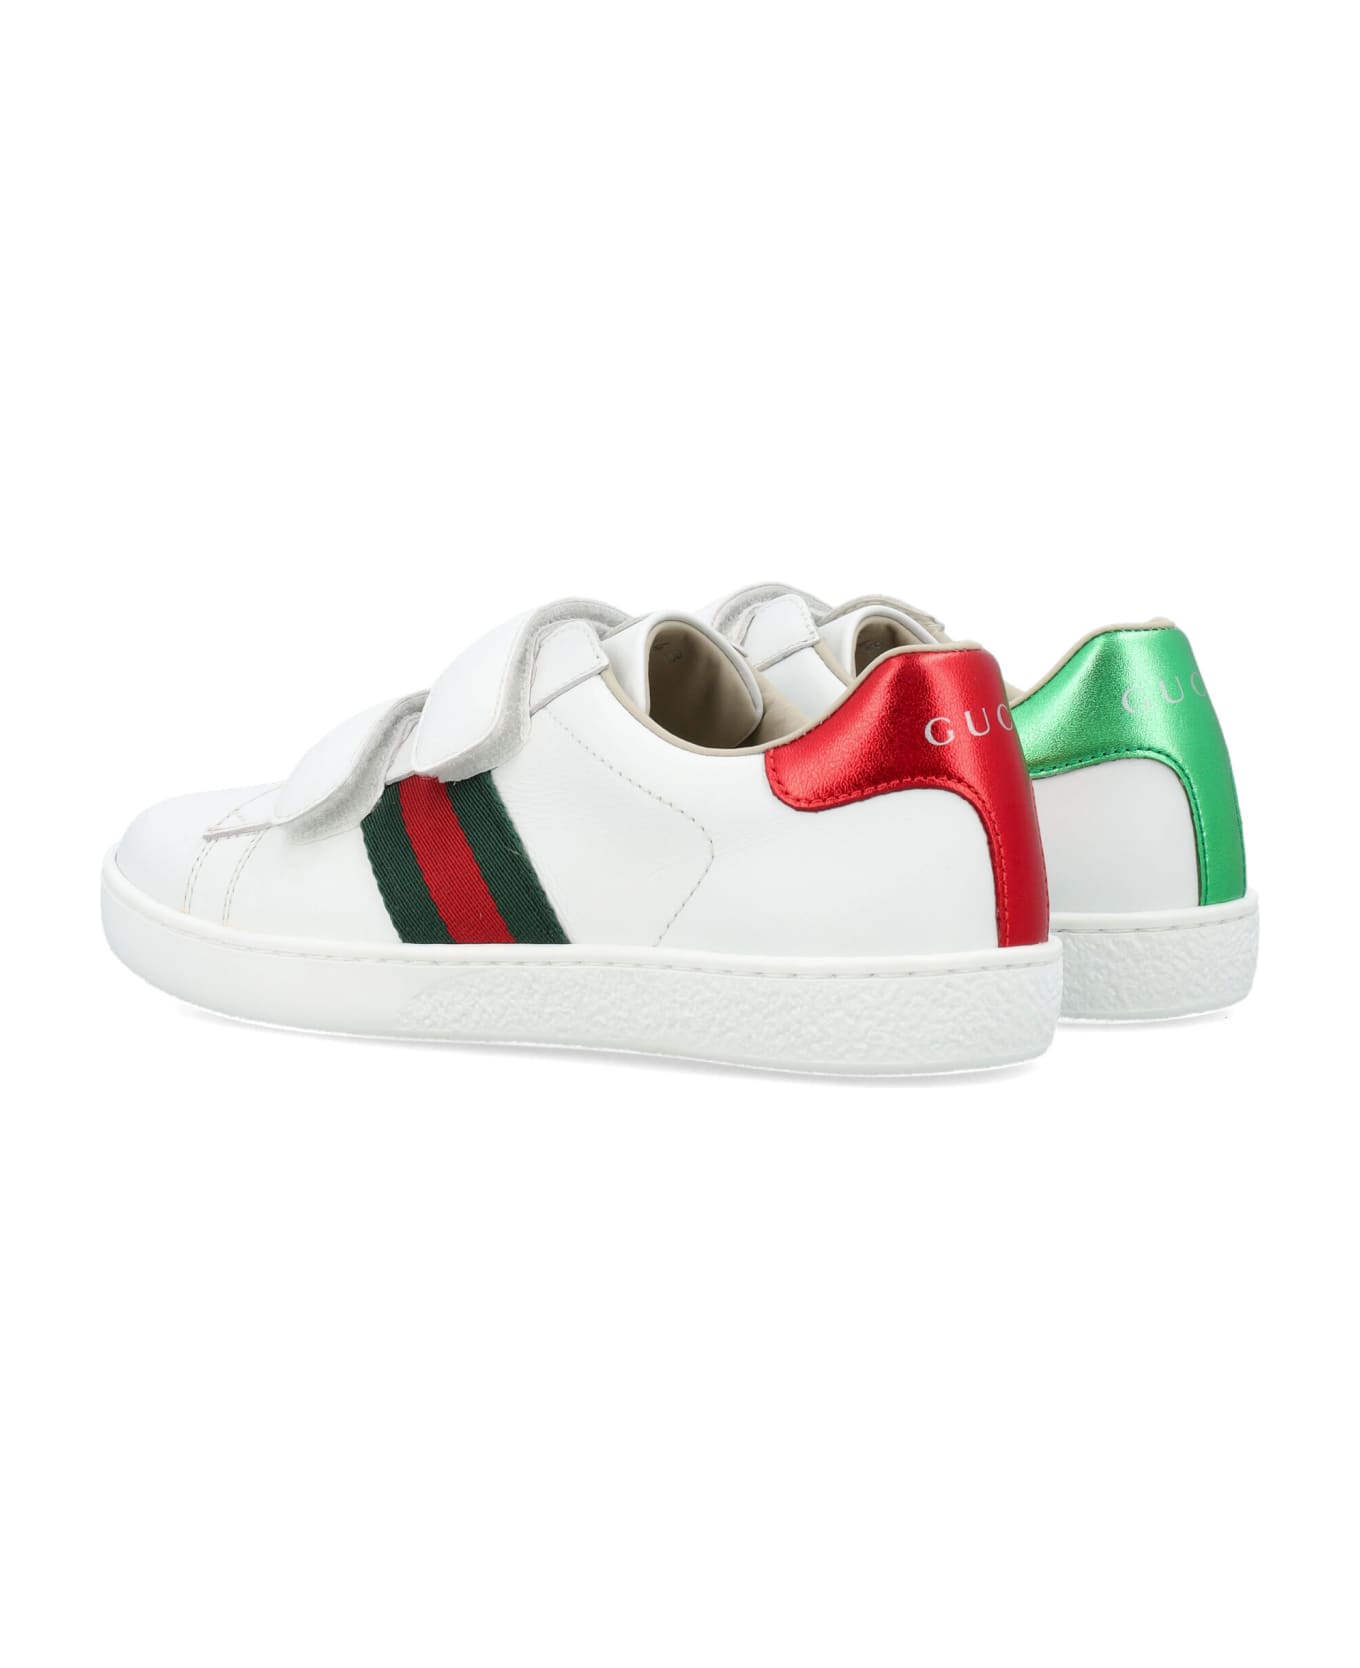 Gucci Ace Leather Sneaker - WHITE